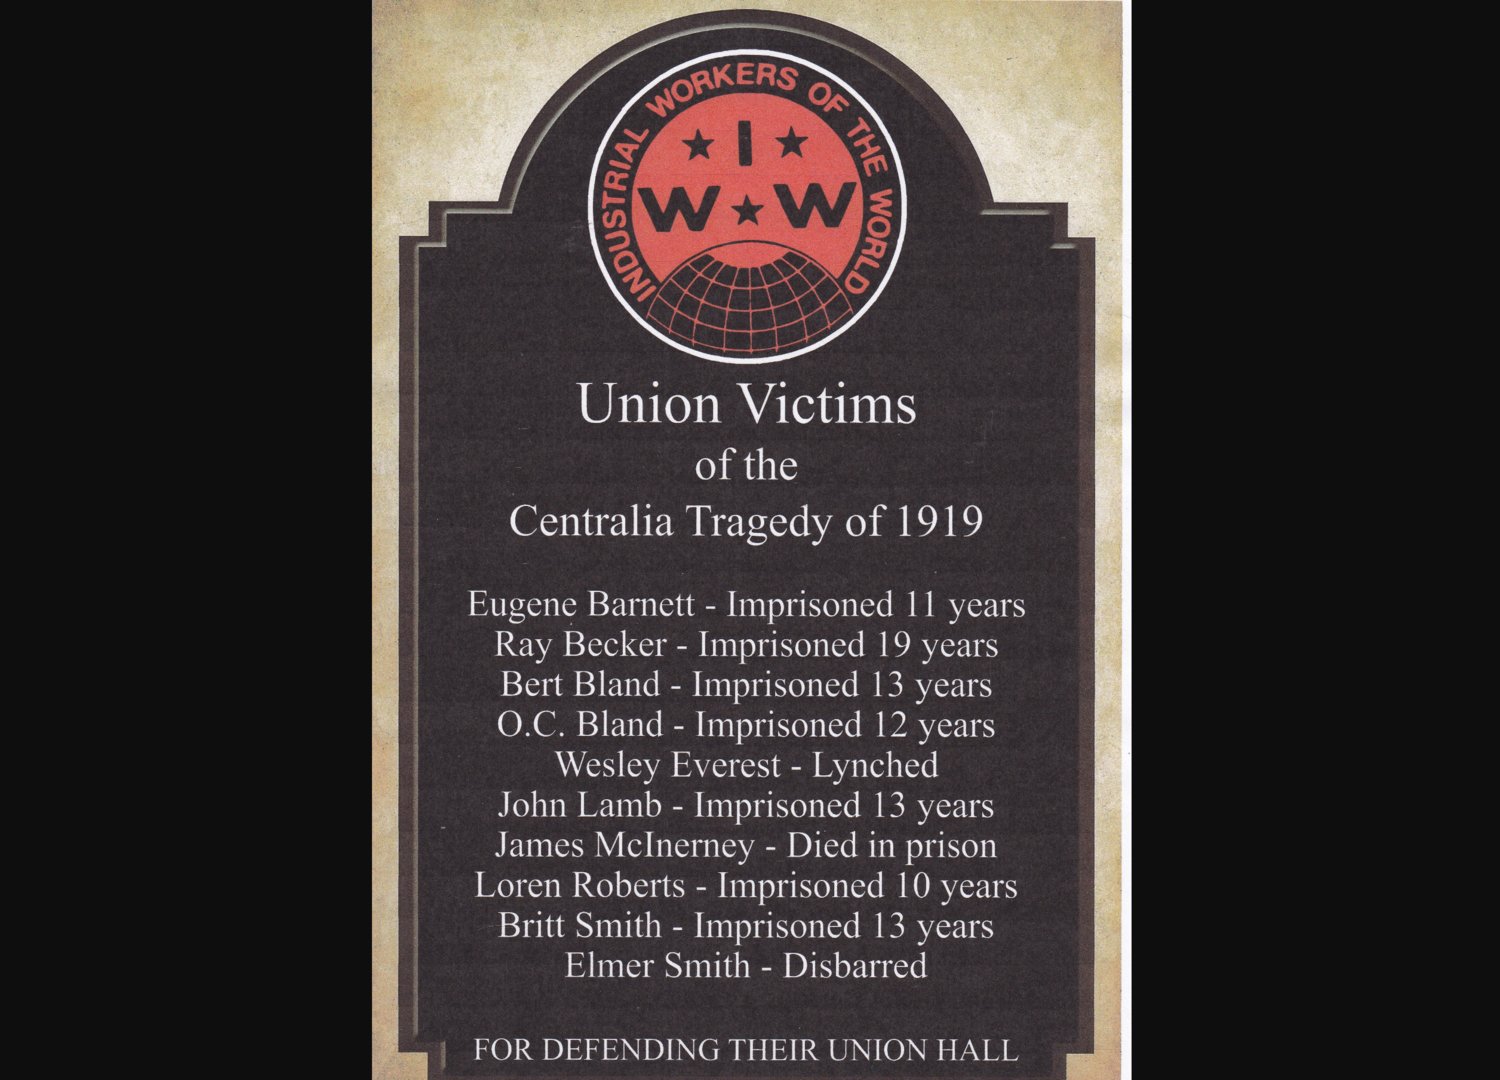 An image of the plaque that will be installed in George Washington Park in Centralia.